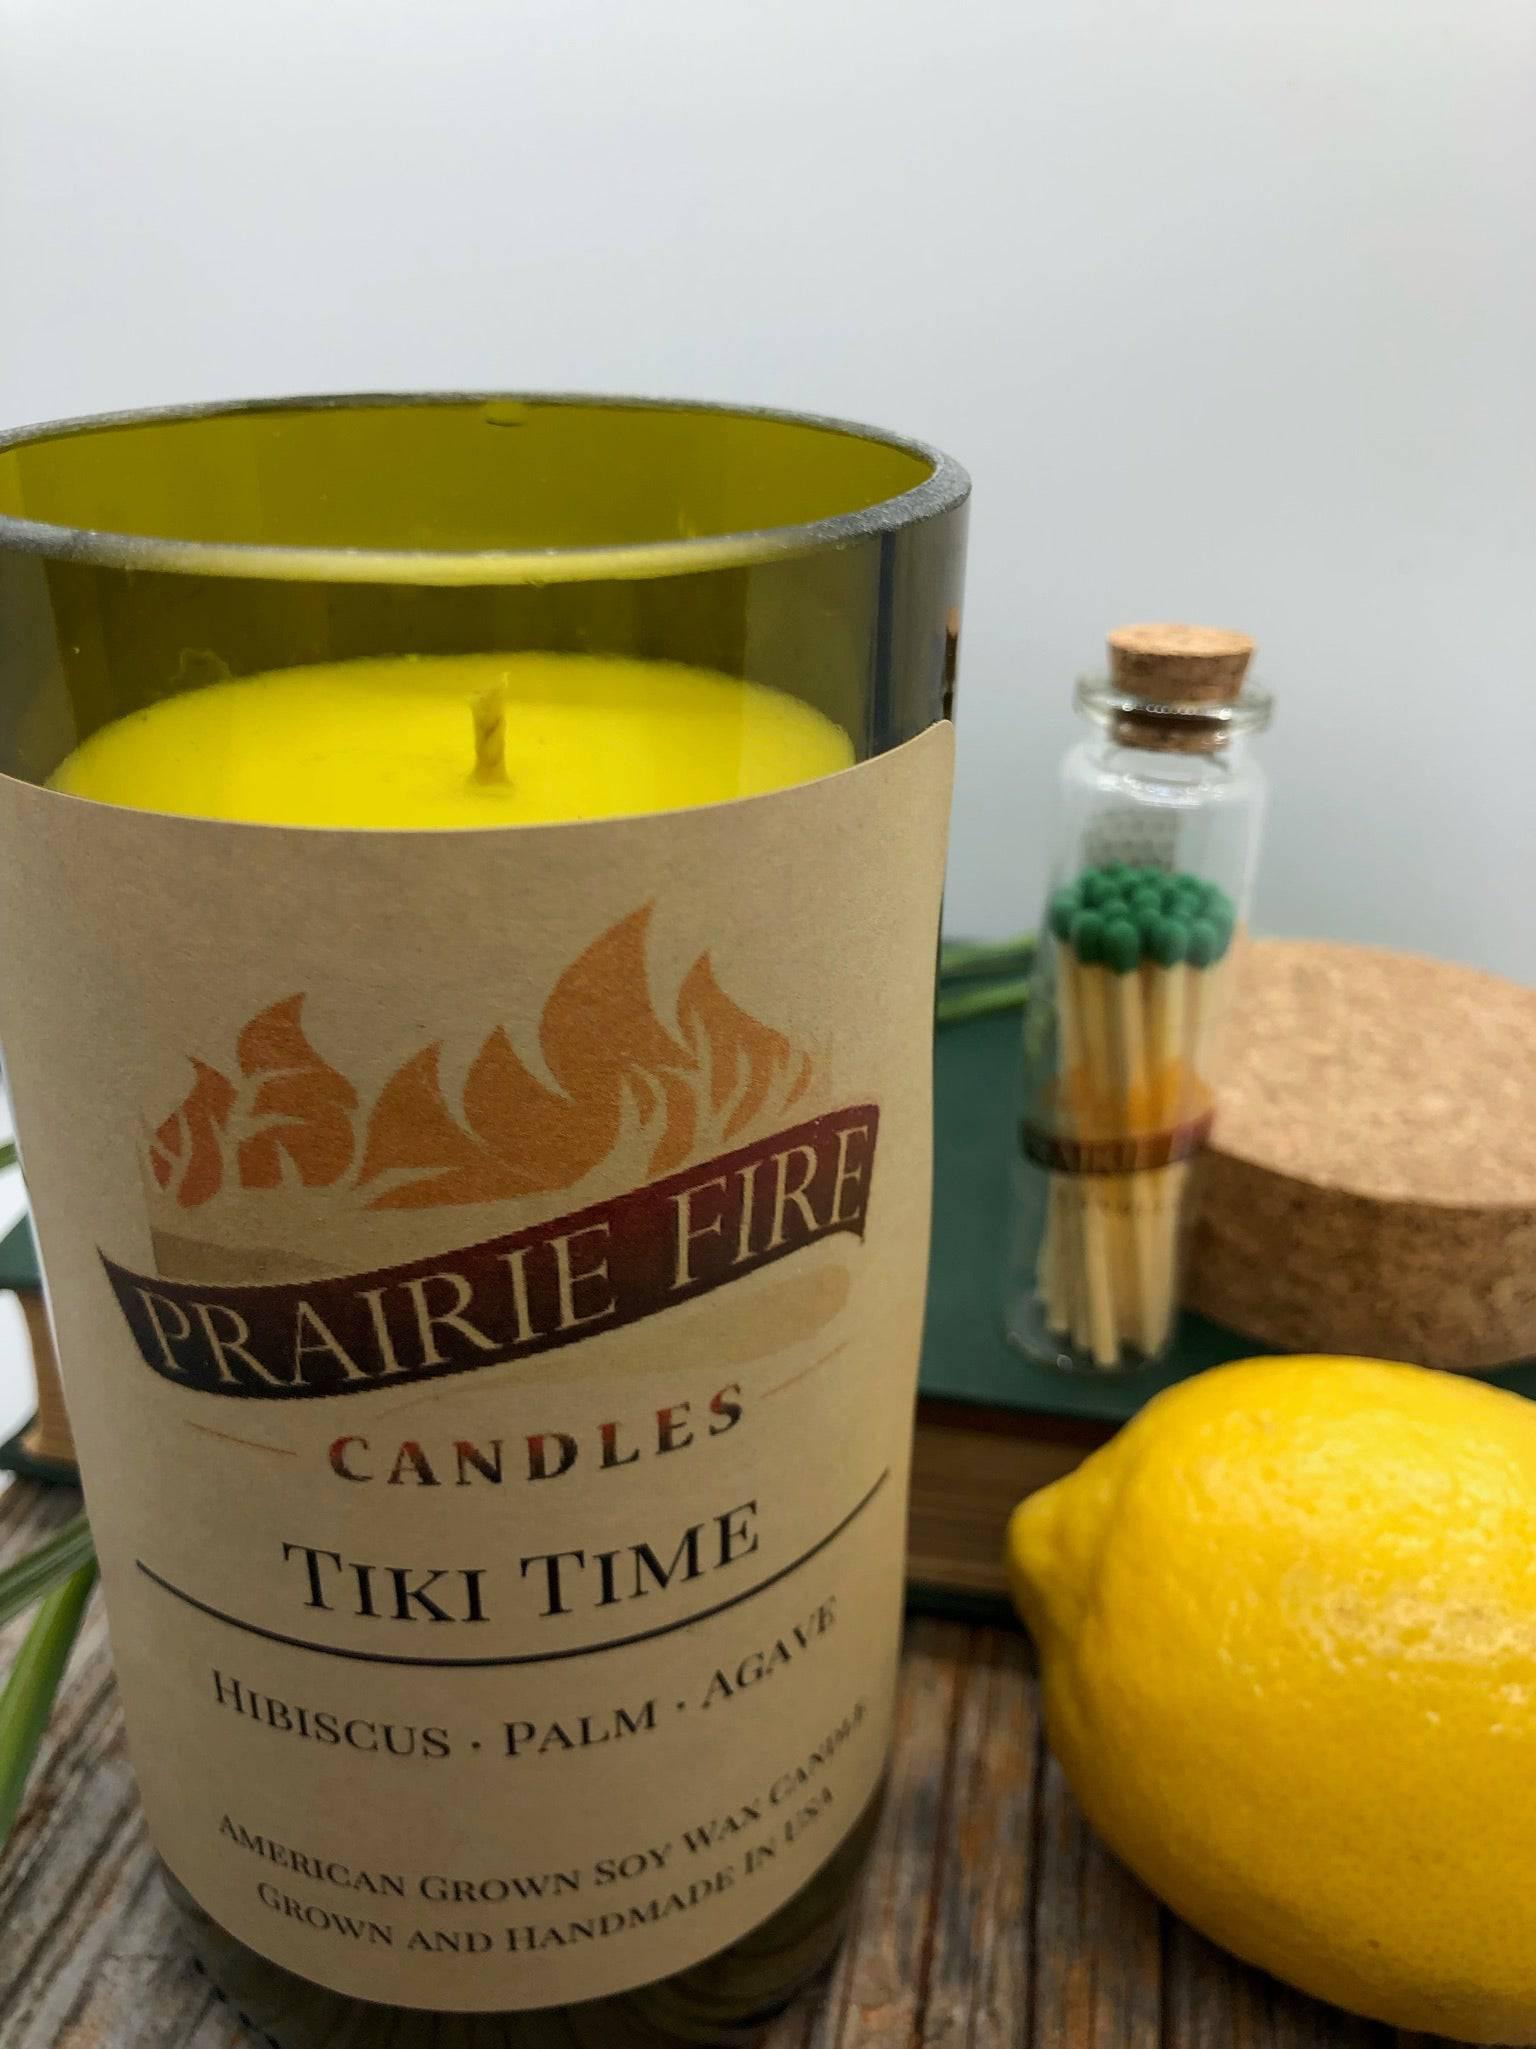 Tiki Time Soy Wax Candle | Repurposed Wine Bottle Candle Natural Cork | Handmade in USA Candle | Eco-Friendly Candle | Non-Toxic Soy Candle - Prairie Fire Candles